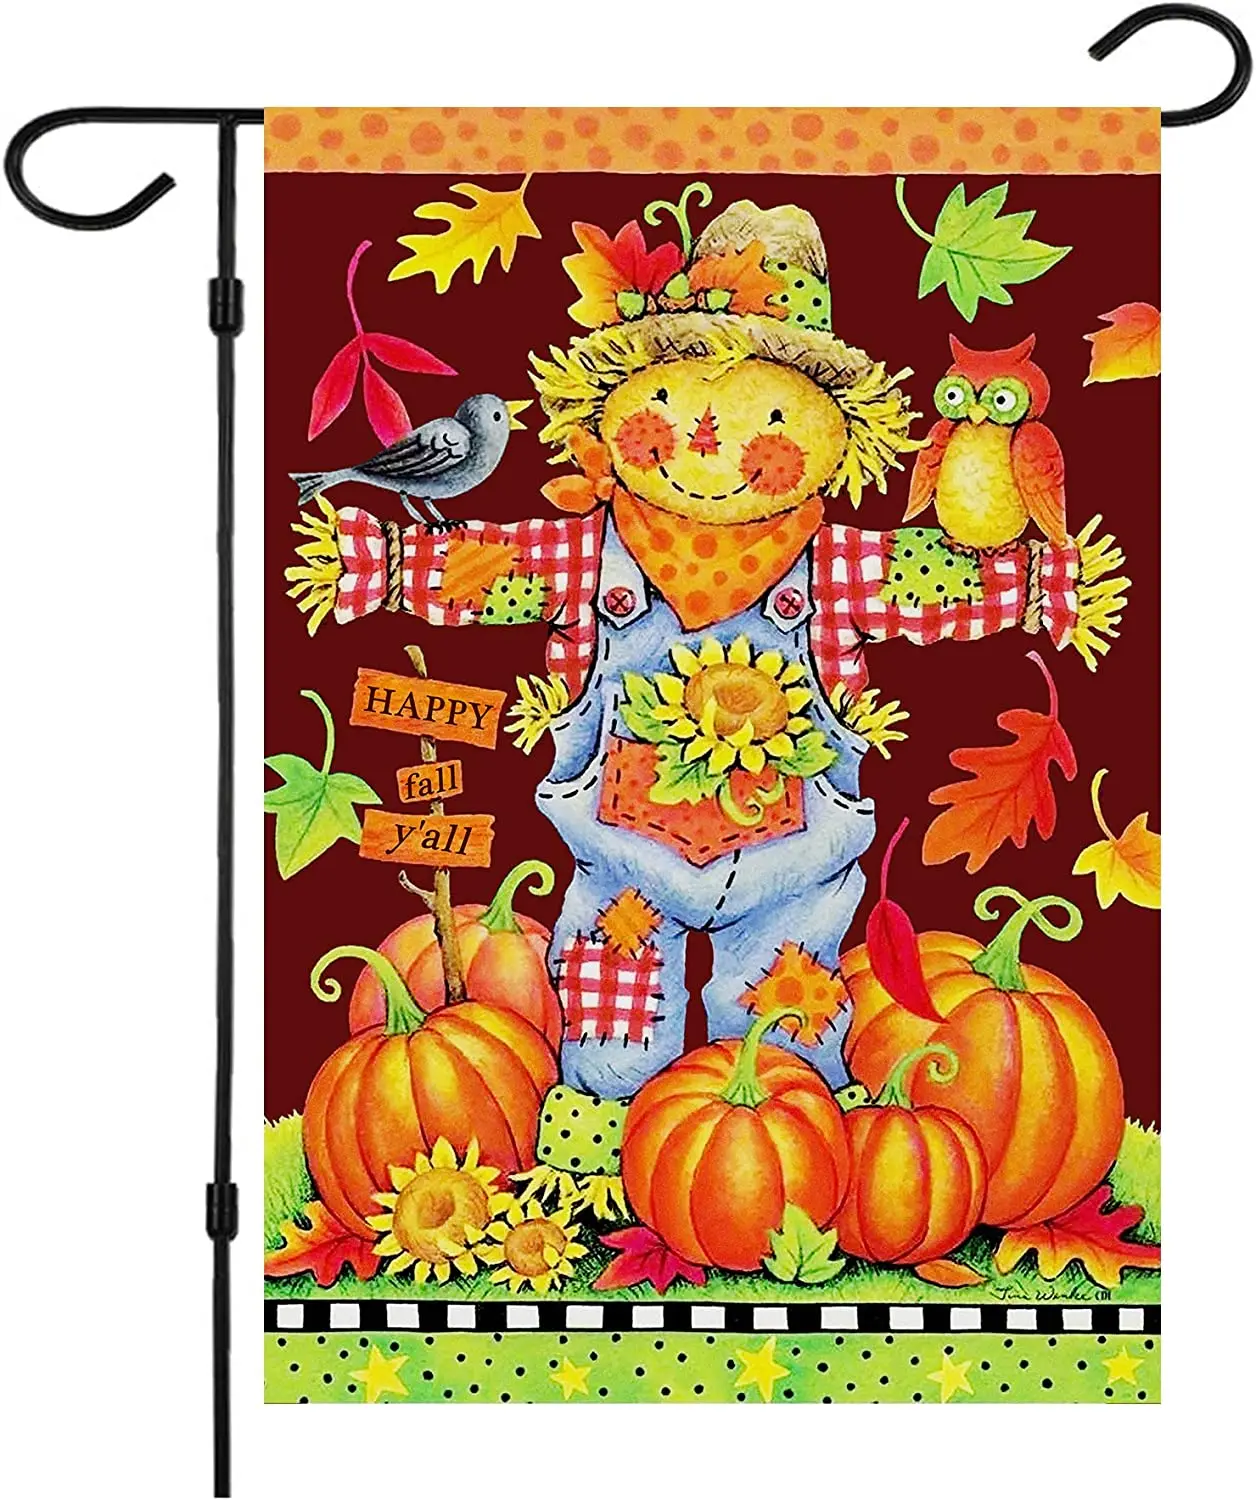 

Happy Fall Garden Flags Double Sided Autumn Flag Scarecrow Harvest Pumpkin Yard Decorations Fall House Flags 12x18 Inch Small